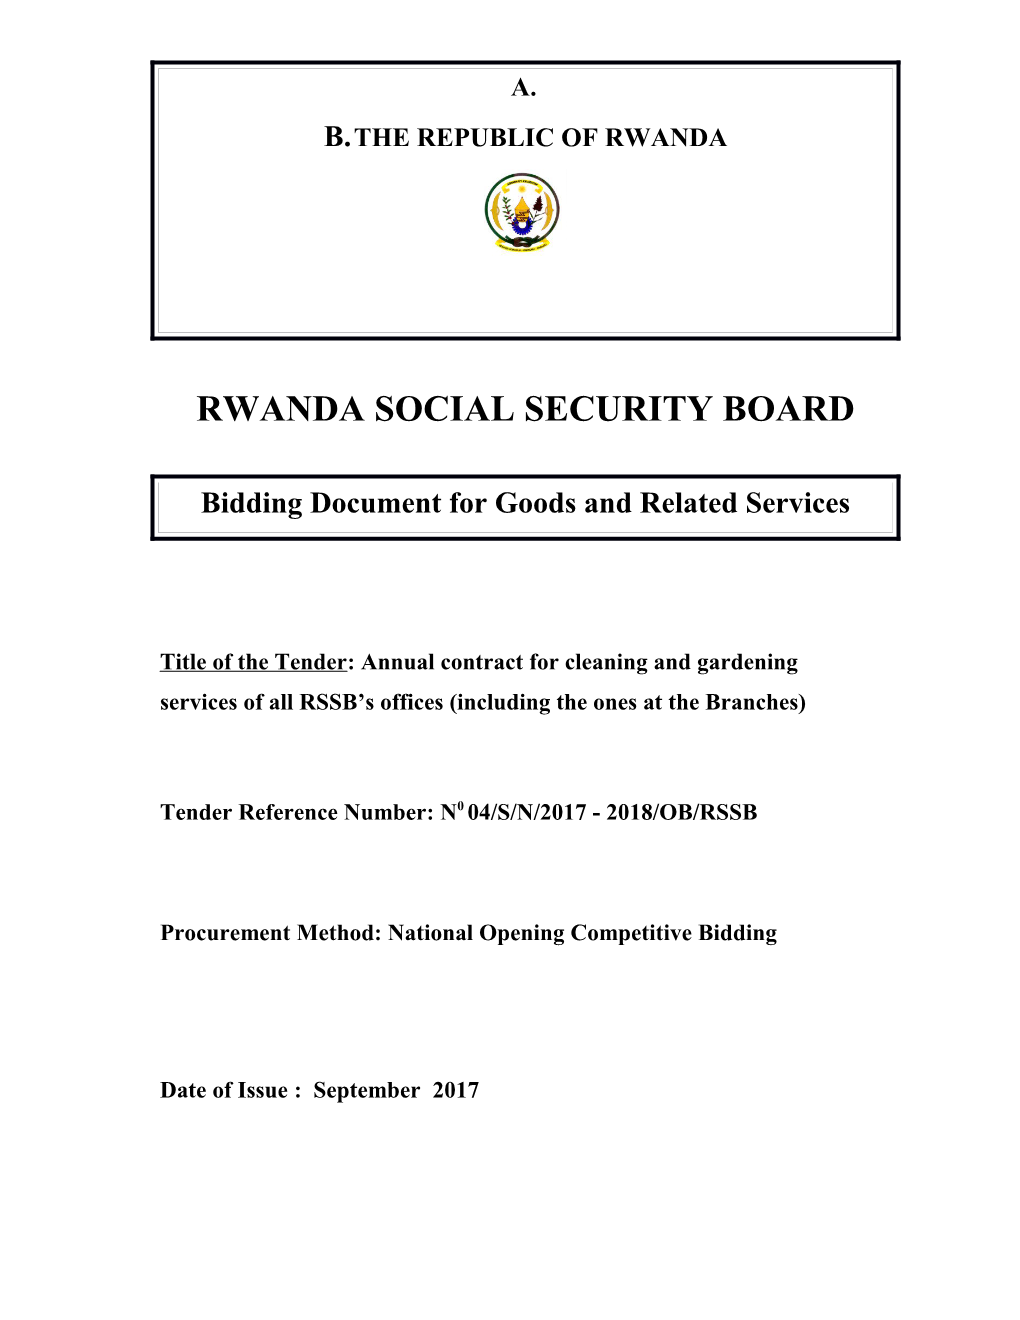 Bidding Document for Goods and Related Services